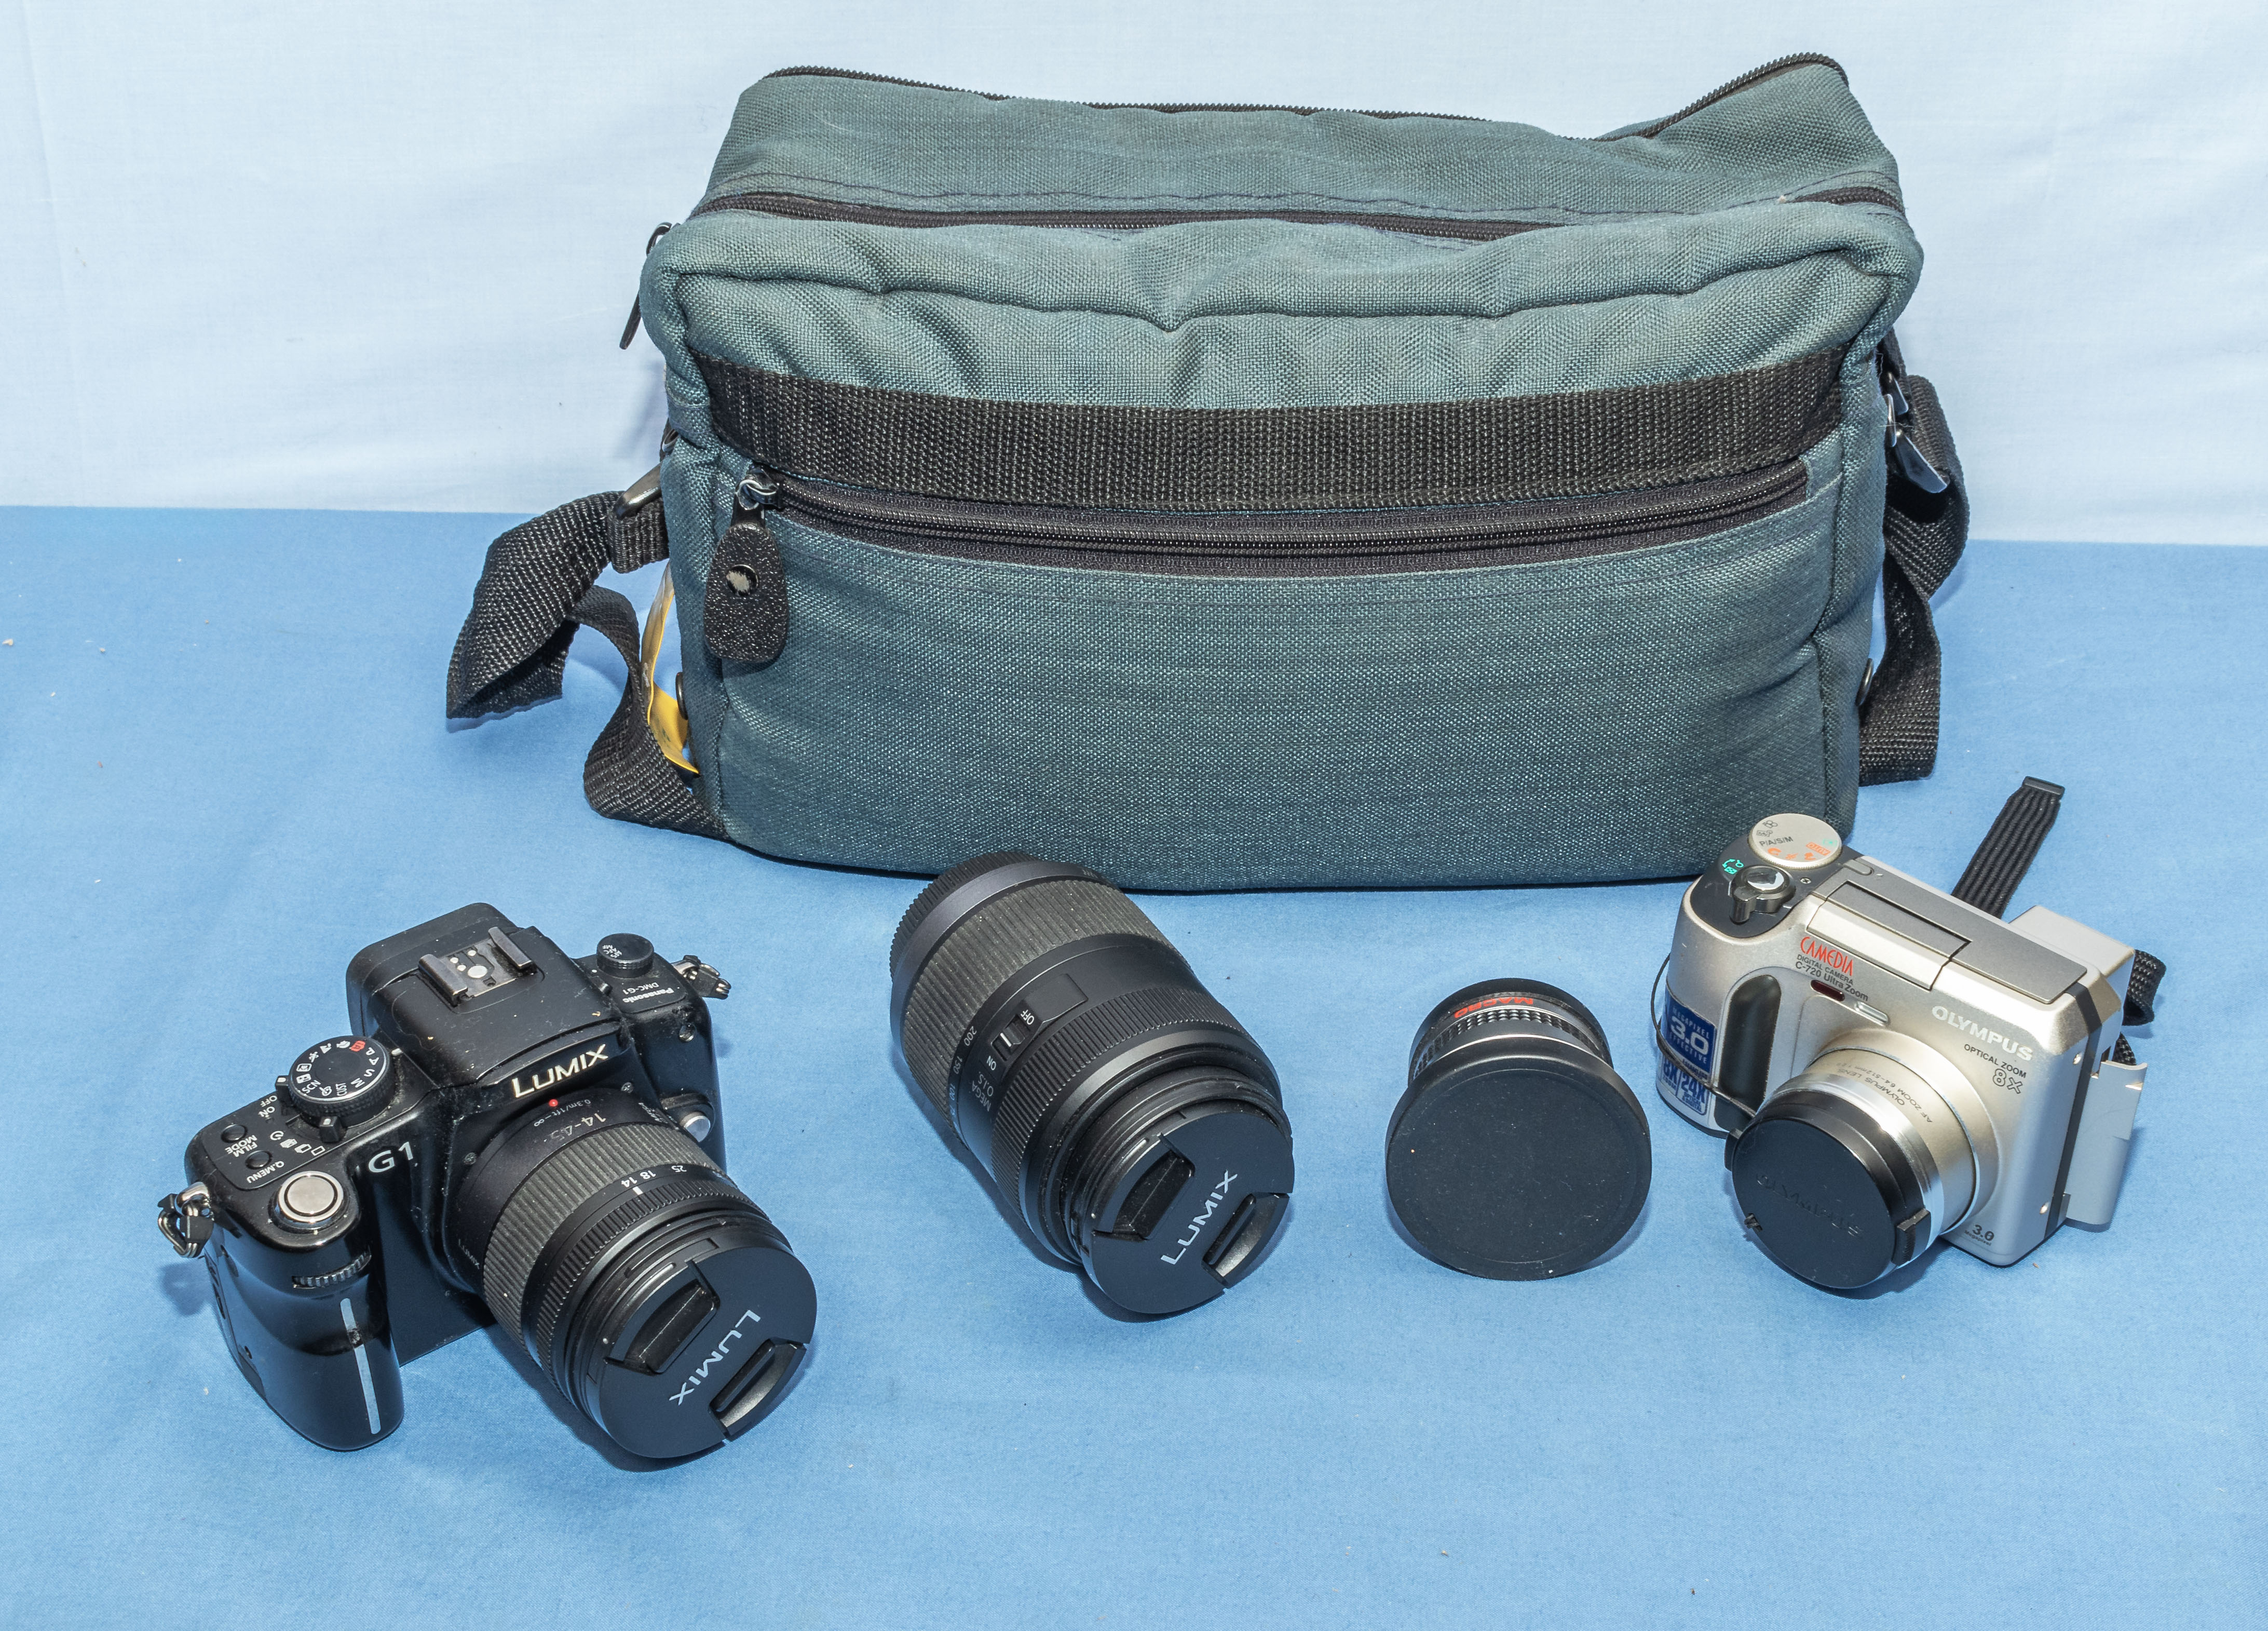 Lumix camera and an Olympus camera with two lens